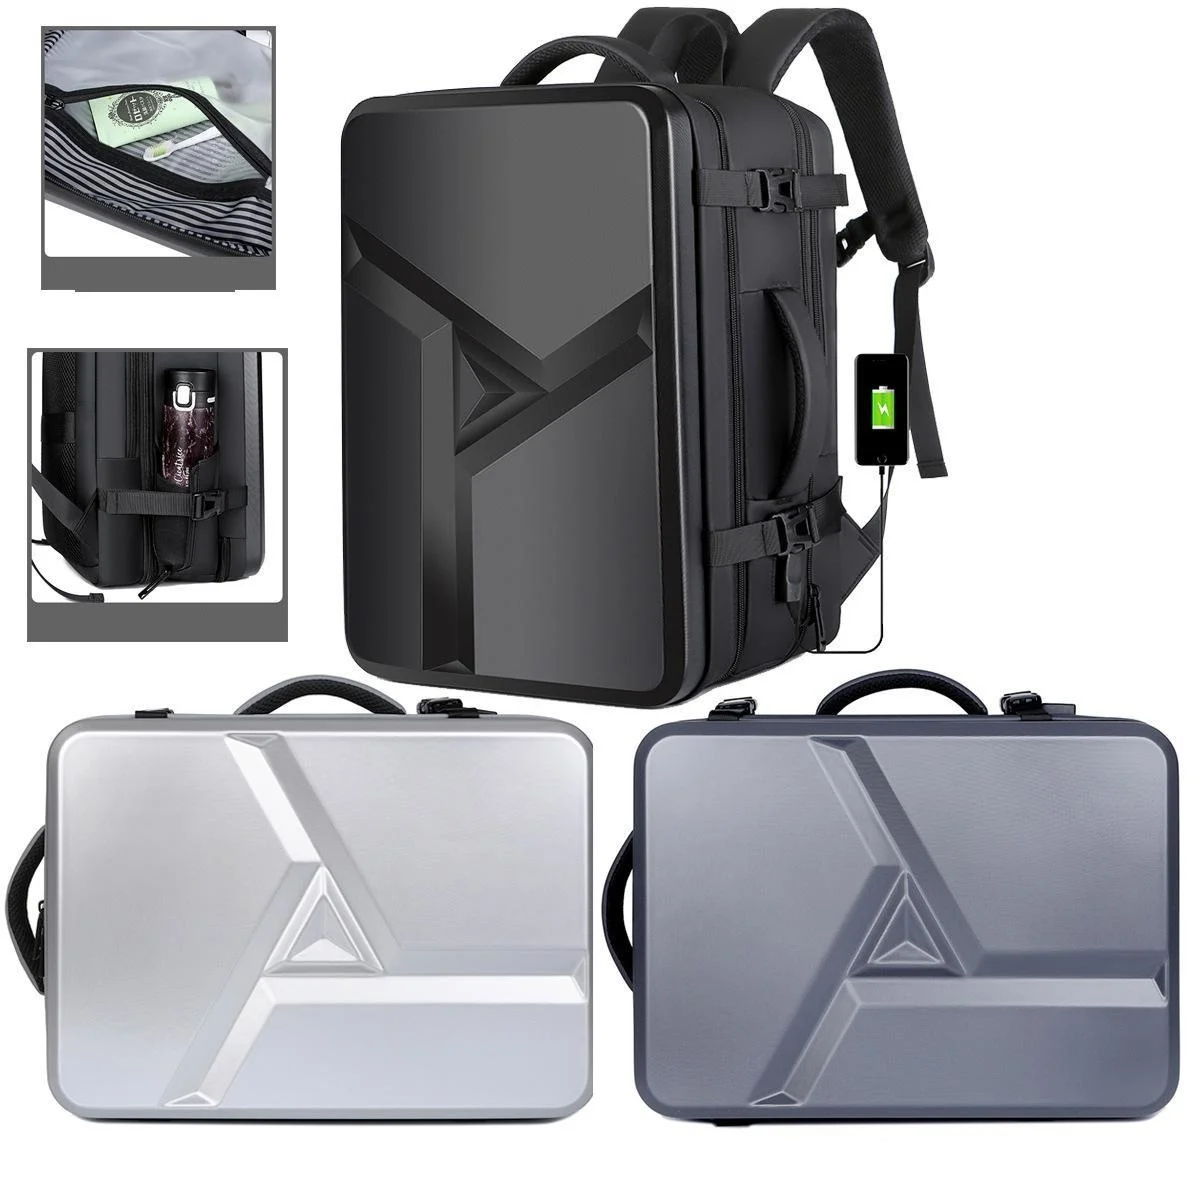 

USBLarge capacity backpack hard shell commuter bag notebook 17 inch computer bag ABS material travel waterproof suitcase